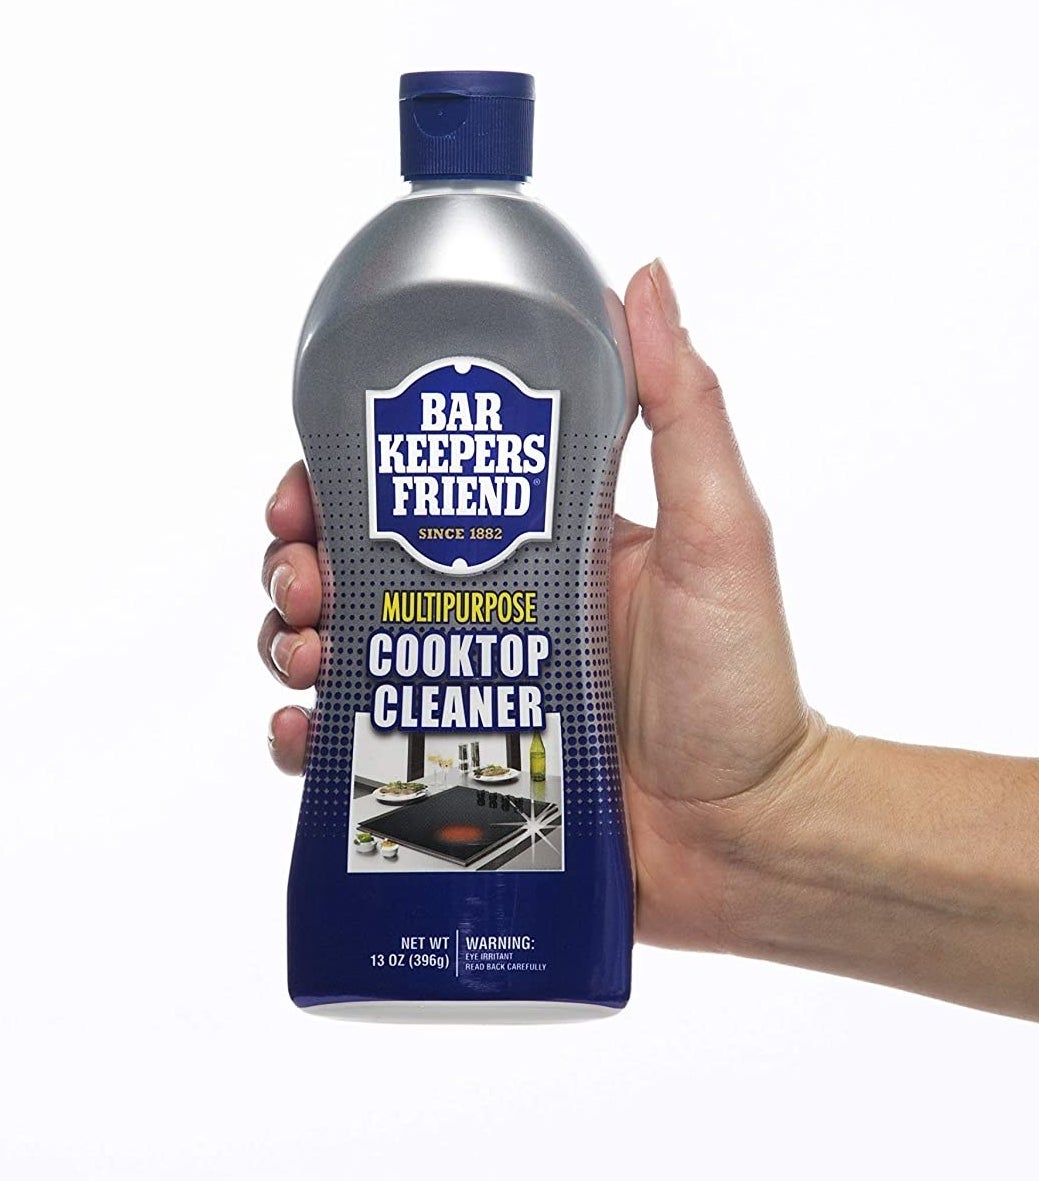 A person holding a bottle of cooktop cleaner